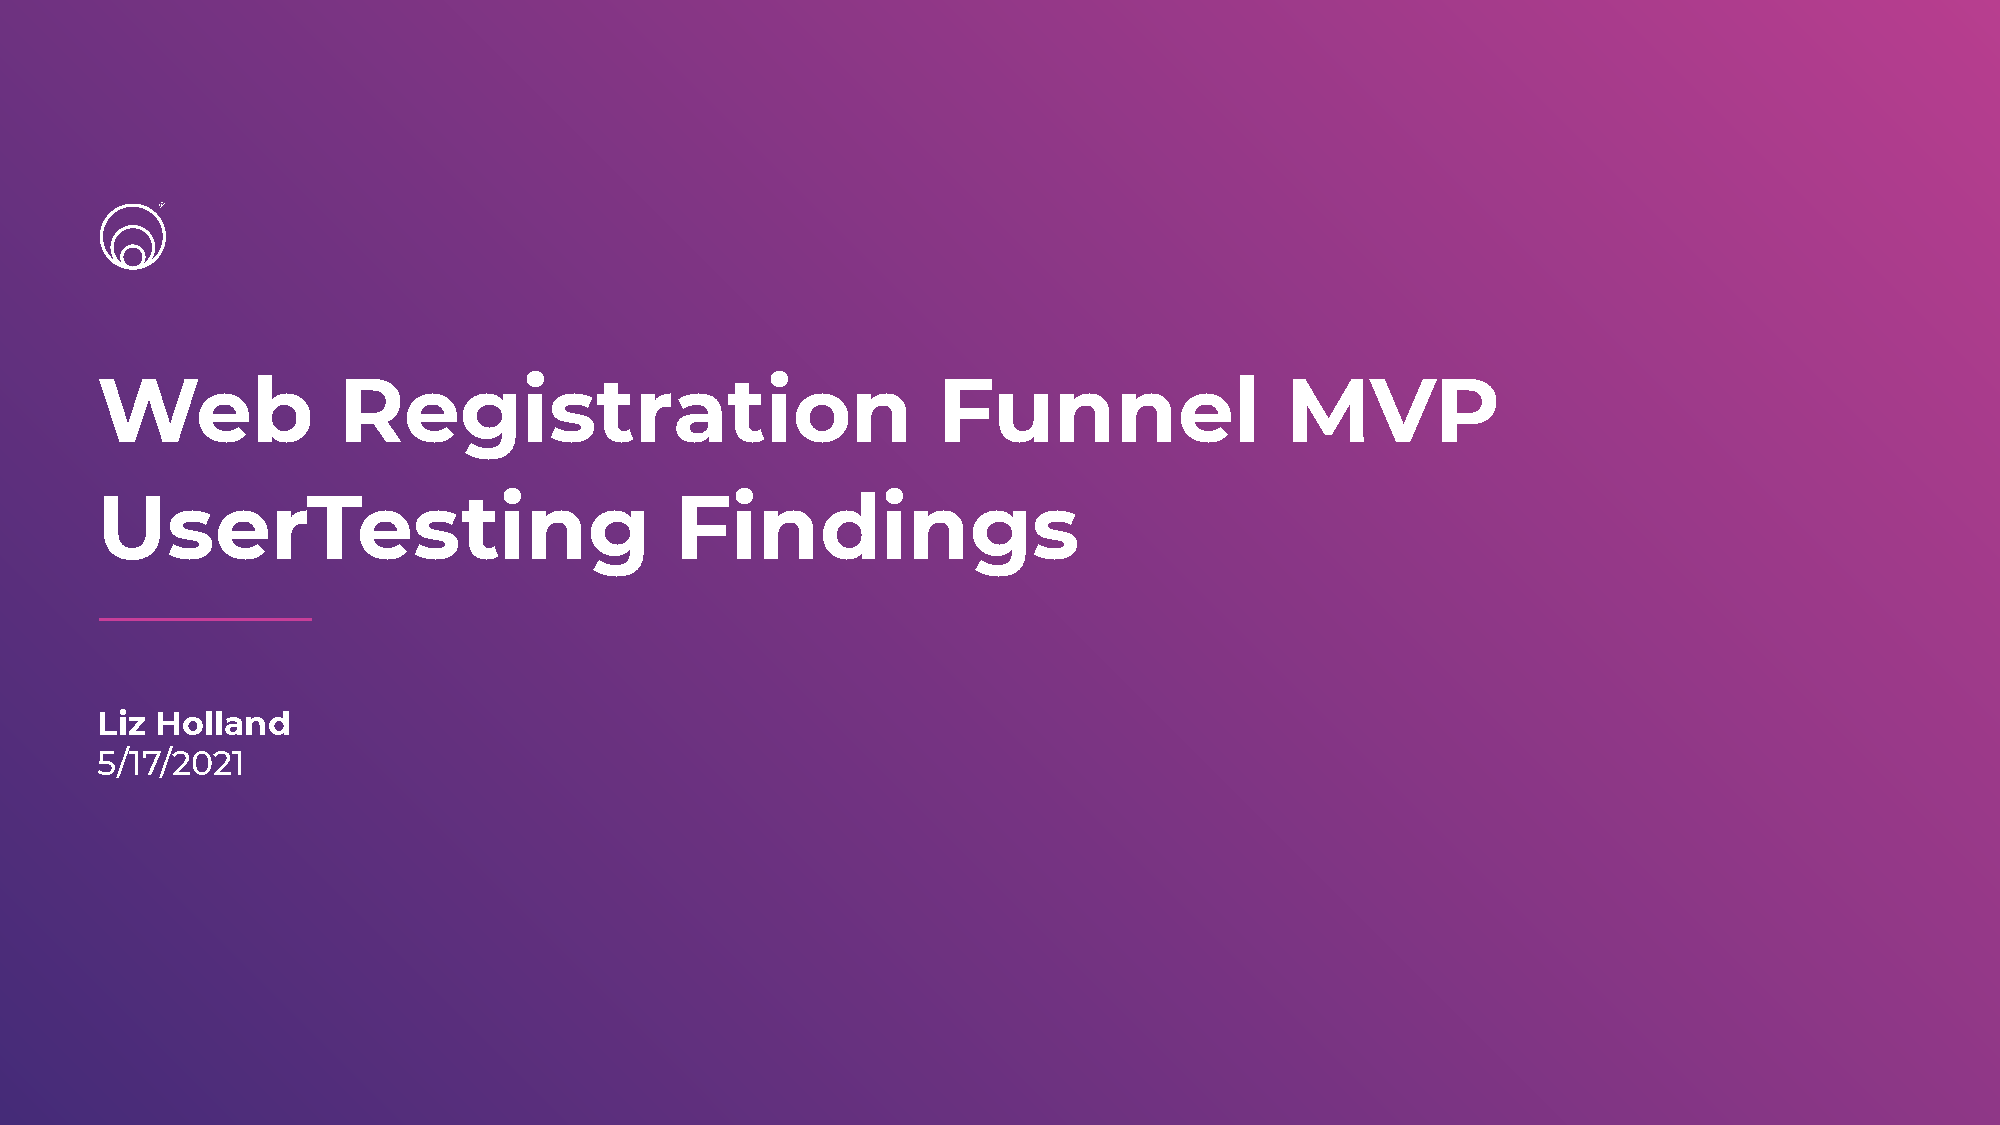 Web Registration Funnel MVP -- Research Findings_Page_1.png